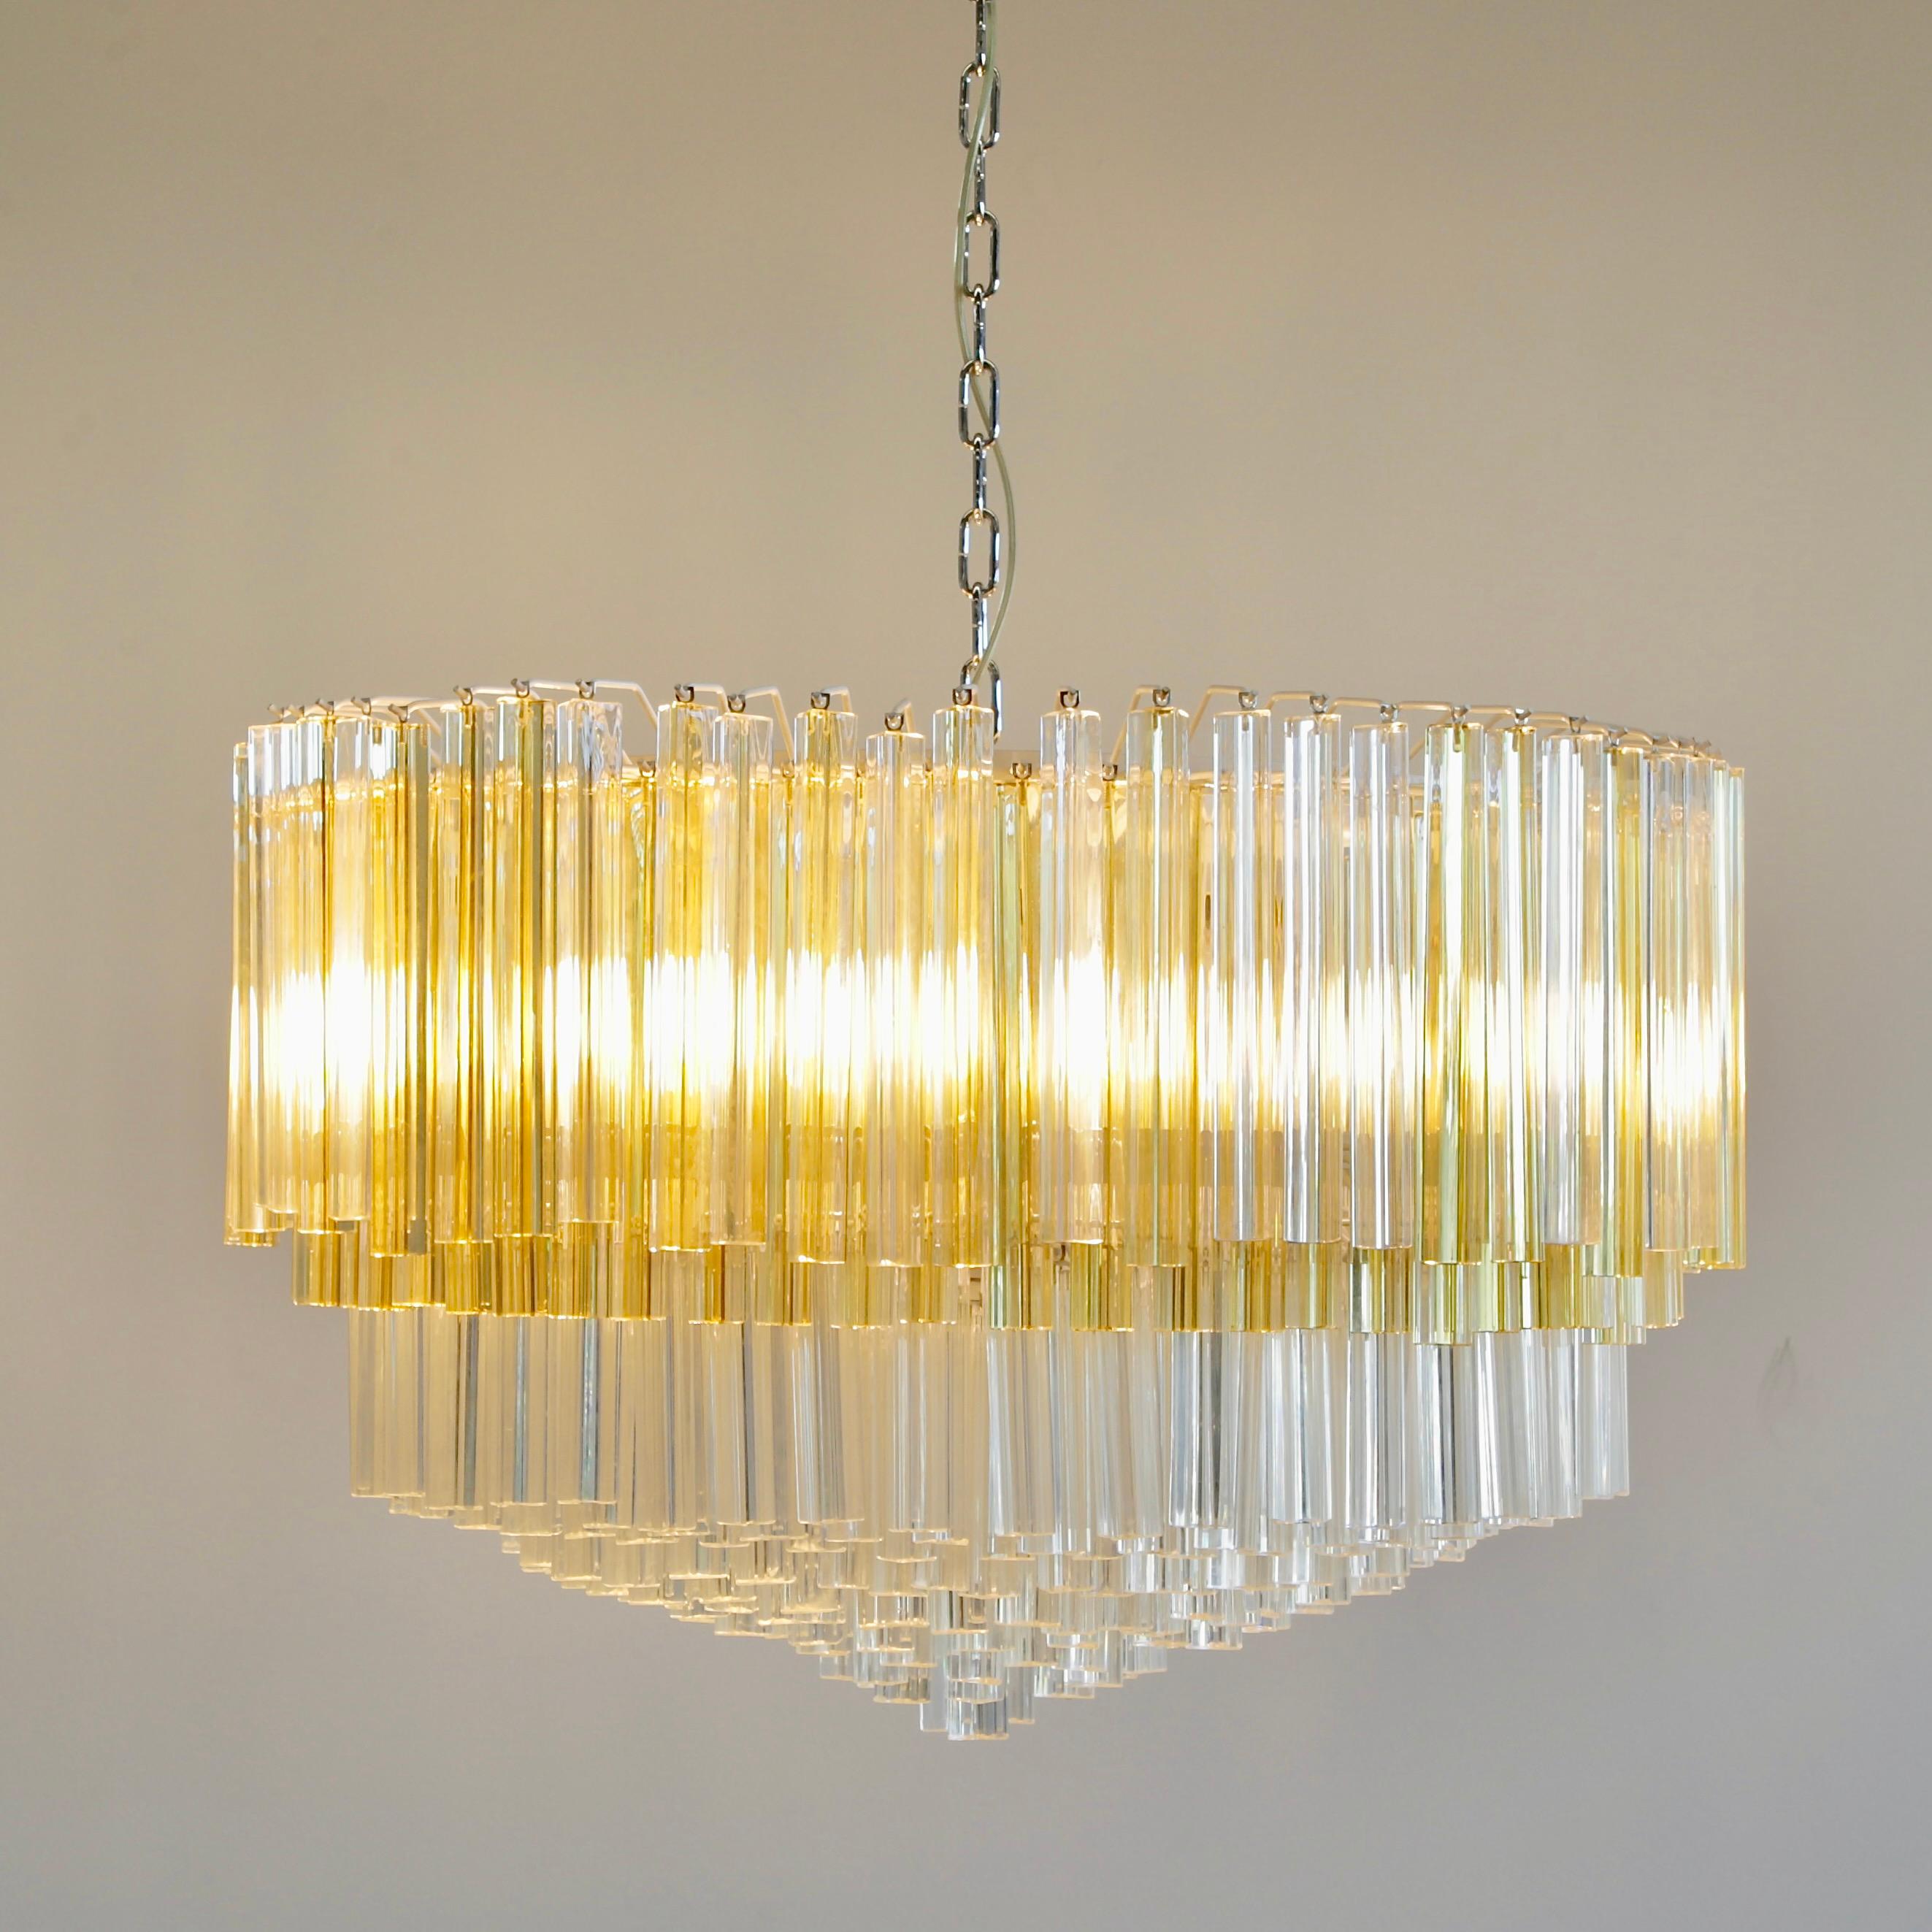 'TRILOBI' glass chandelier. Italy, Murano.

Large glass chandelier with clear and amber coloured 'Trilobi' glass made in Murano, c. 1980. Multi-tier glass chandelier with white metal frame, twelve E27 light fittings and some 300 Trilobi glass